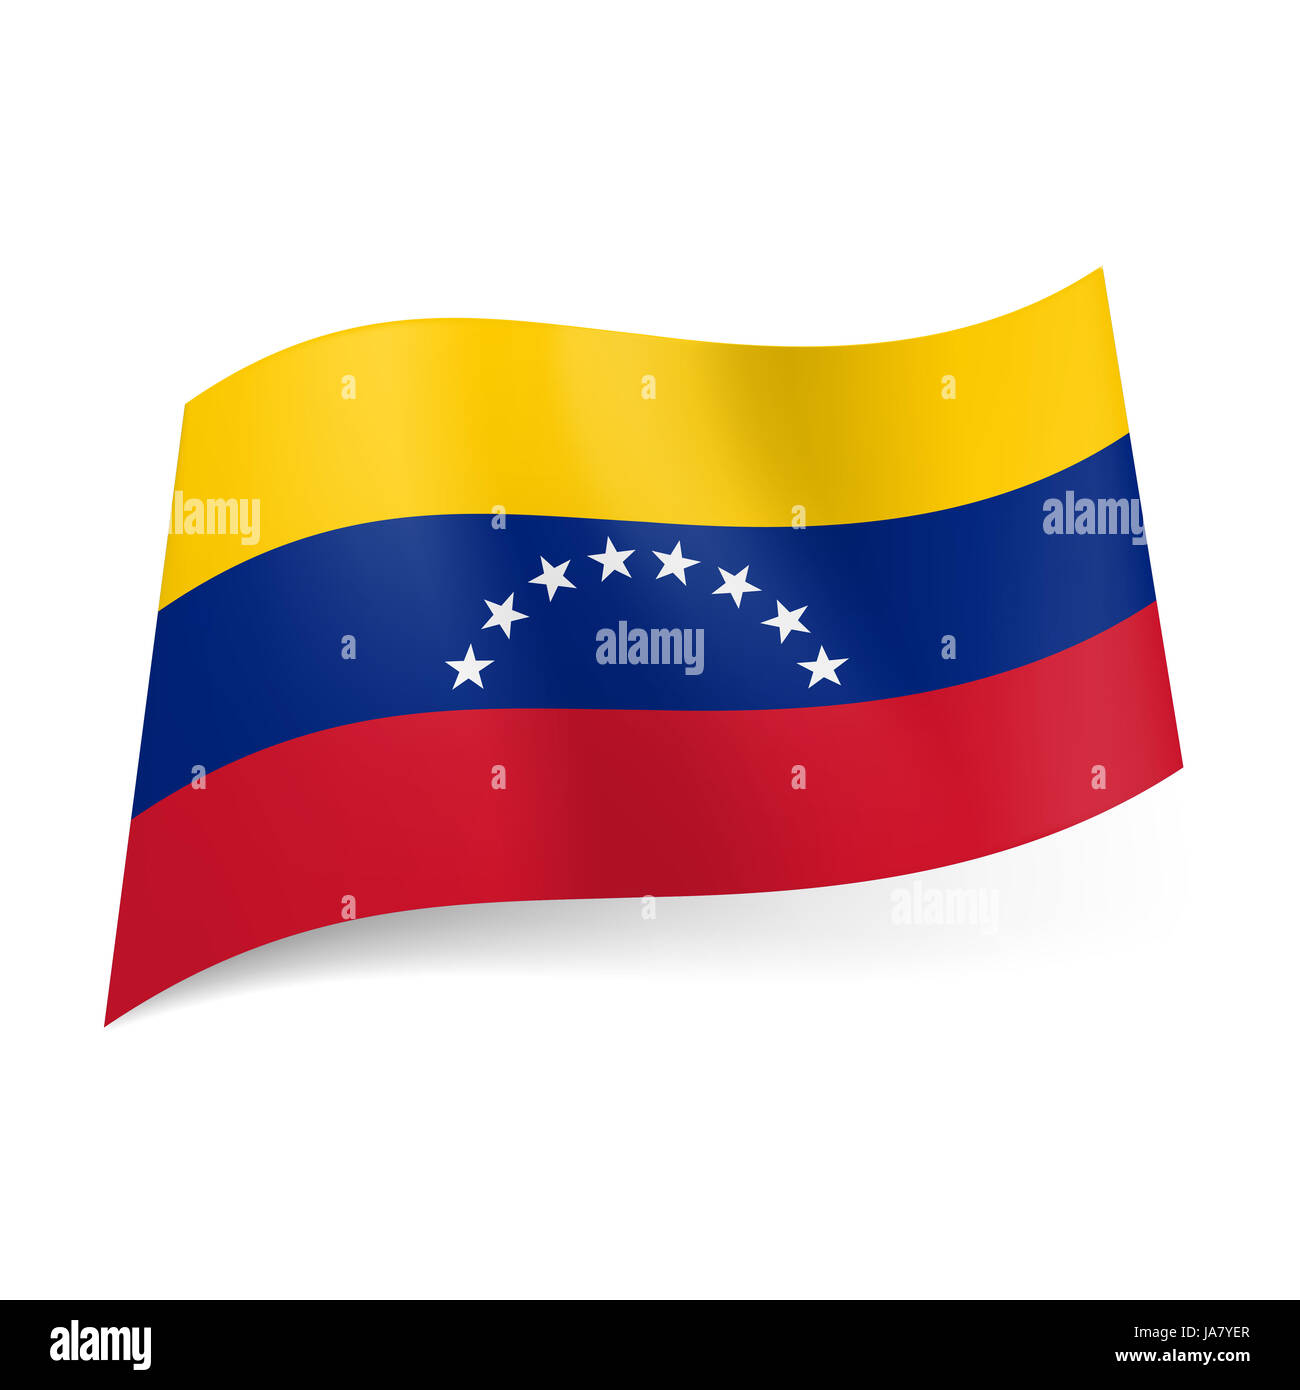 National flag of Venezuela: yellow, blue and red horizontal with semi-circle of stars on band Stock Photo -